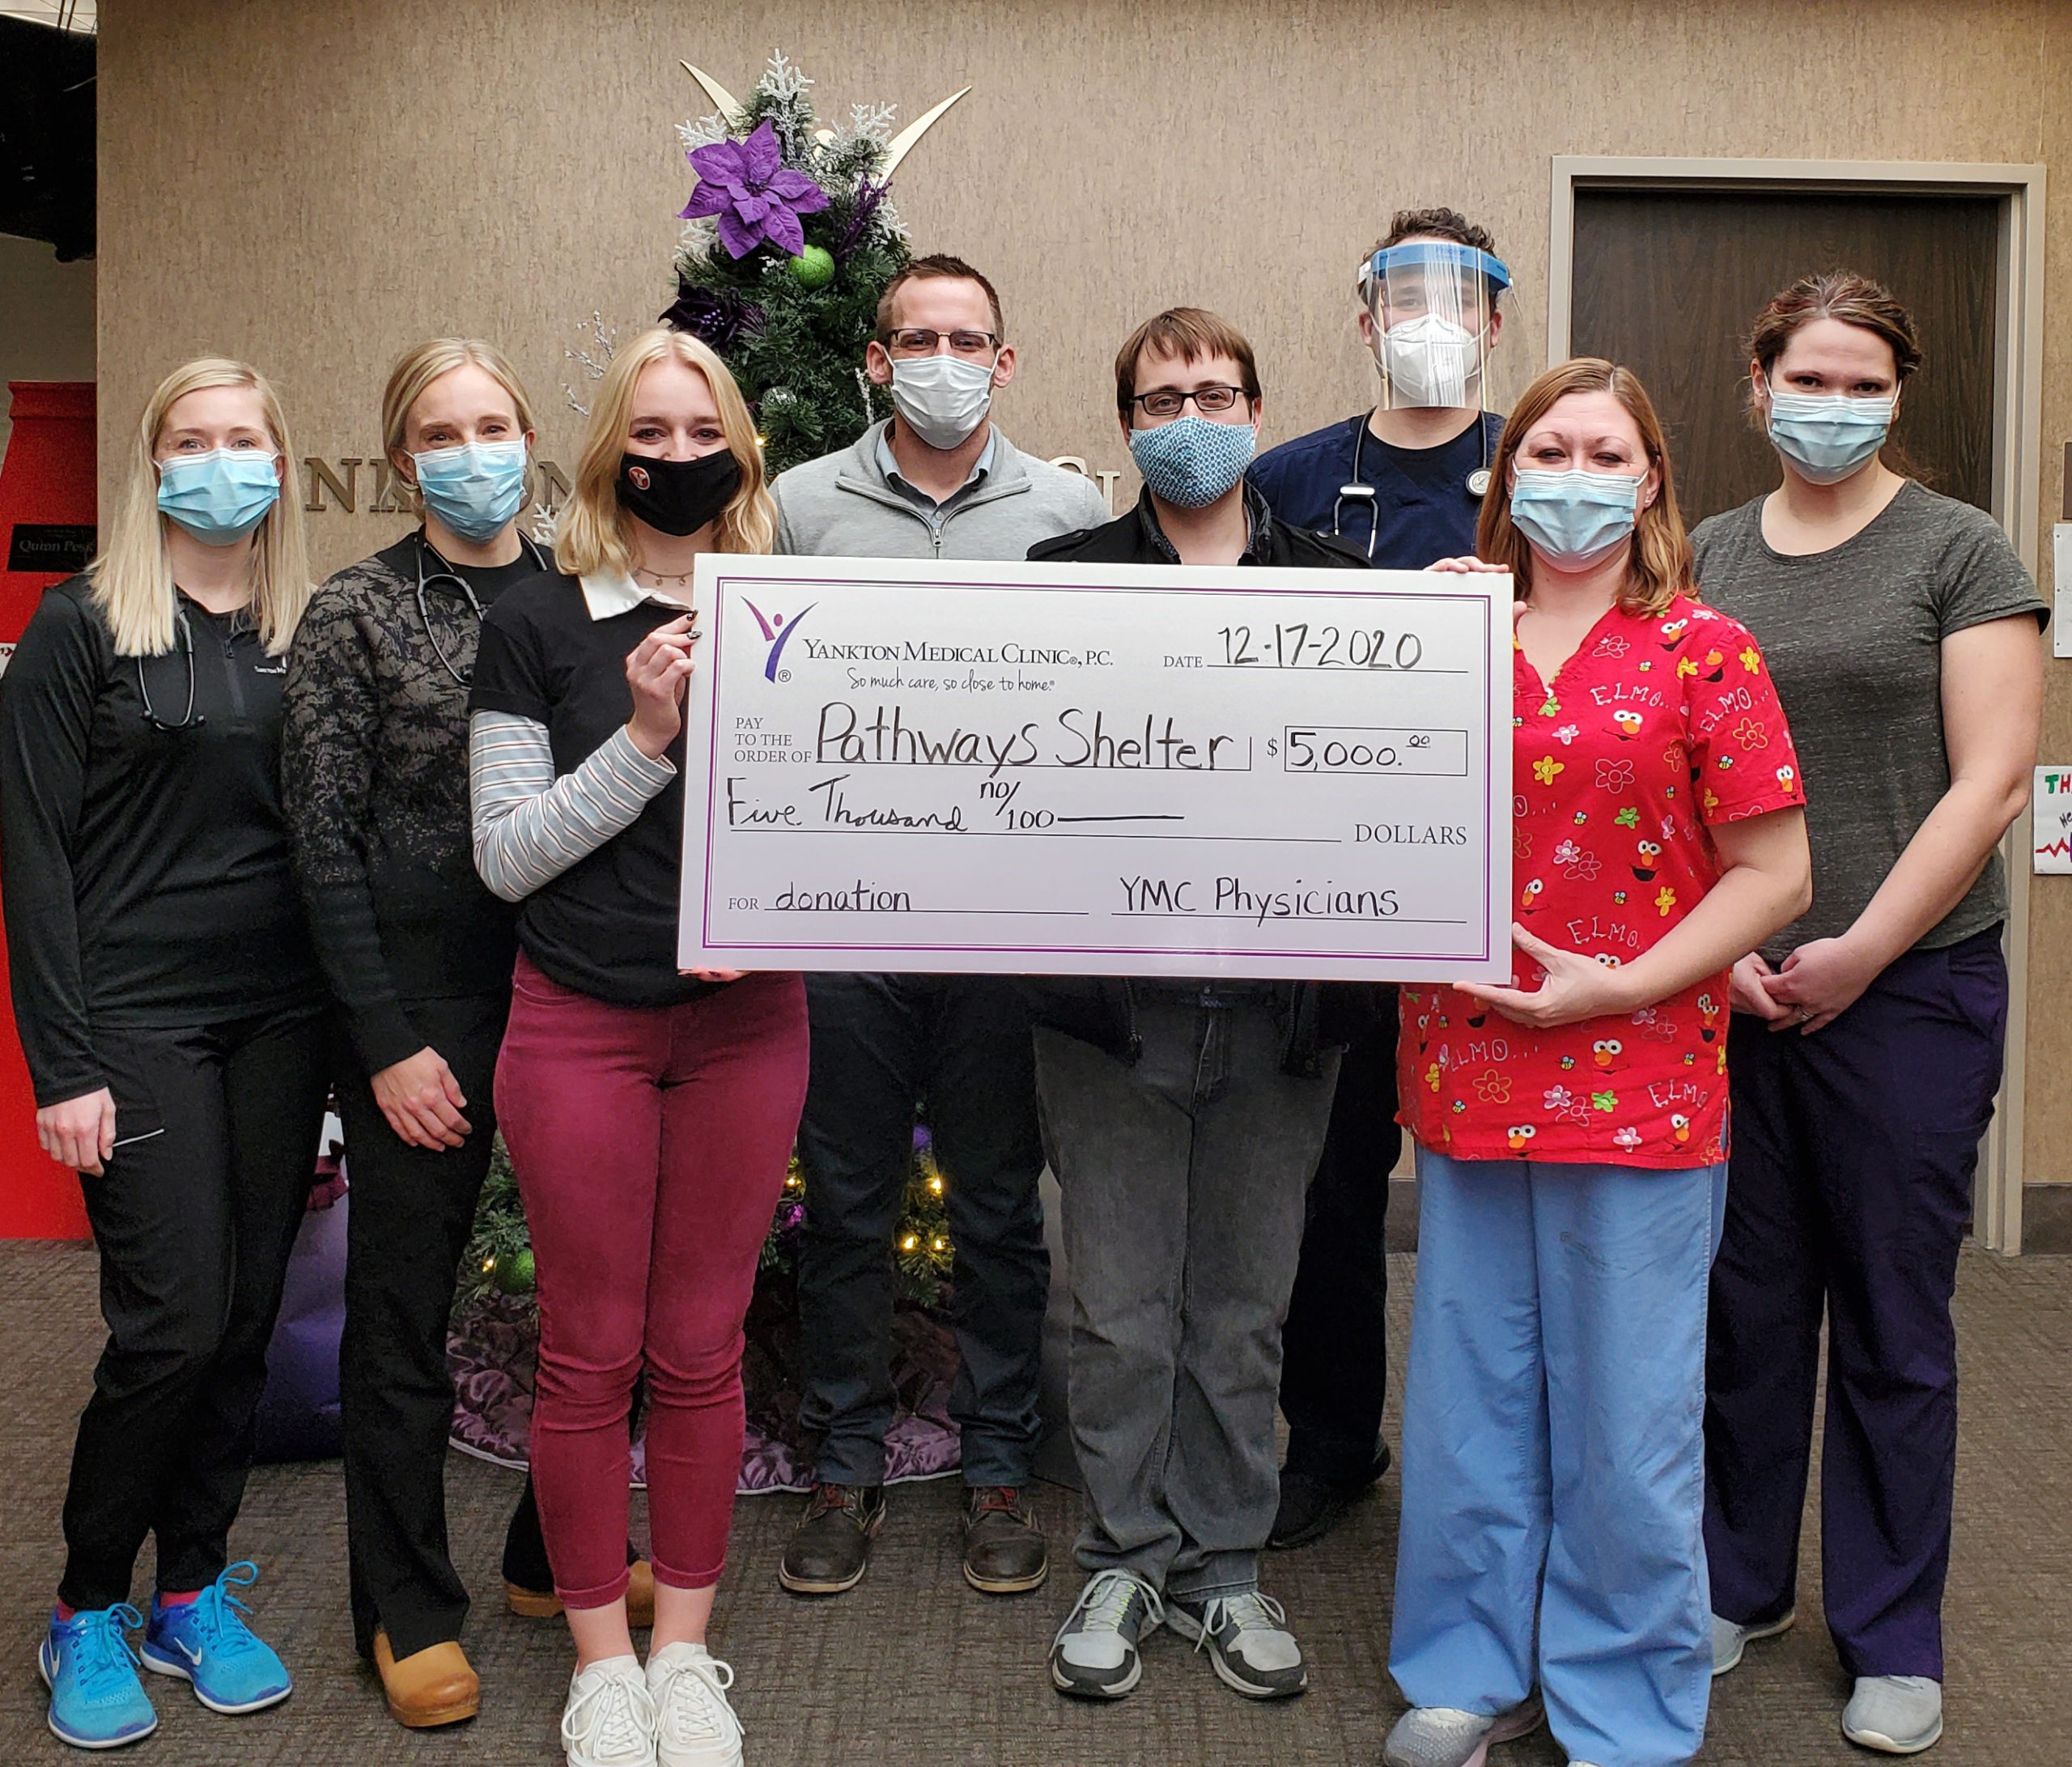 Yankton Medical Clinic physicians and Pathways Shelter for the Homeless accept a check for a donation.